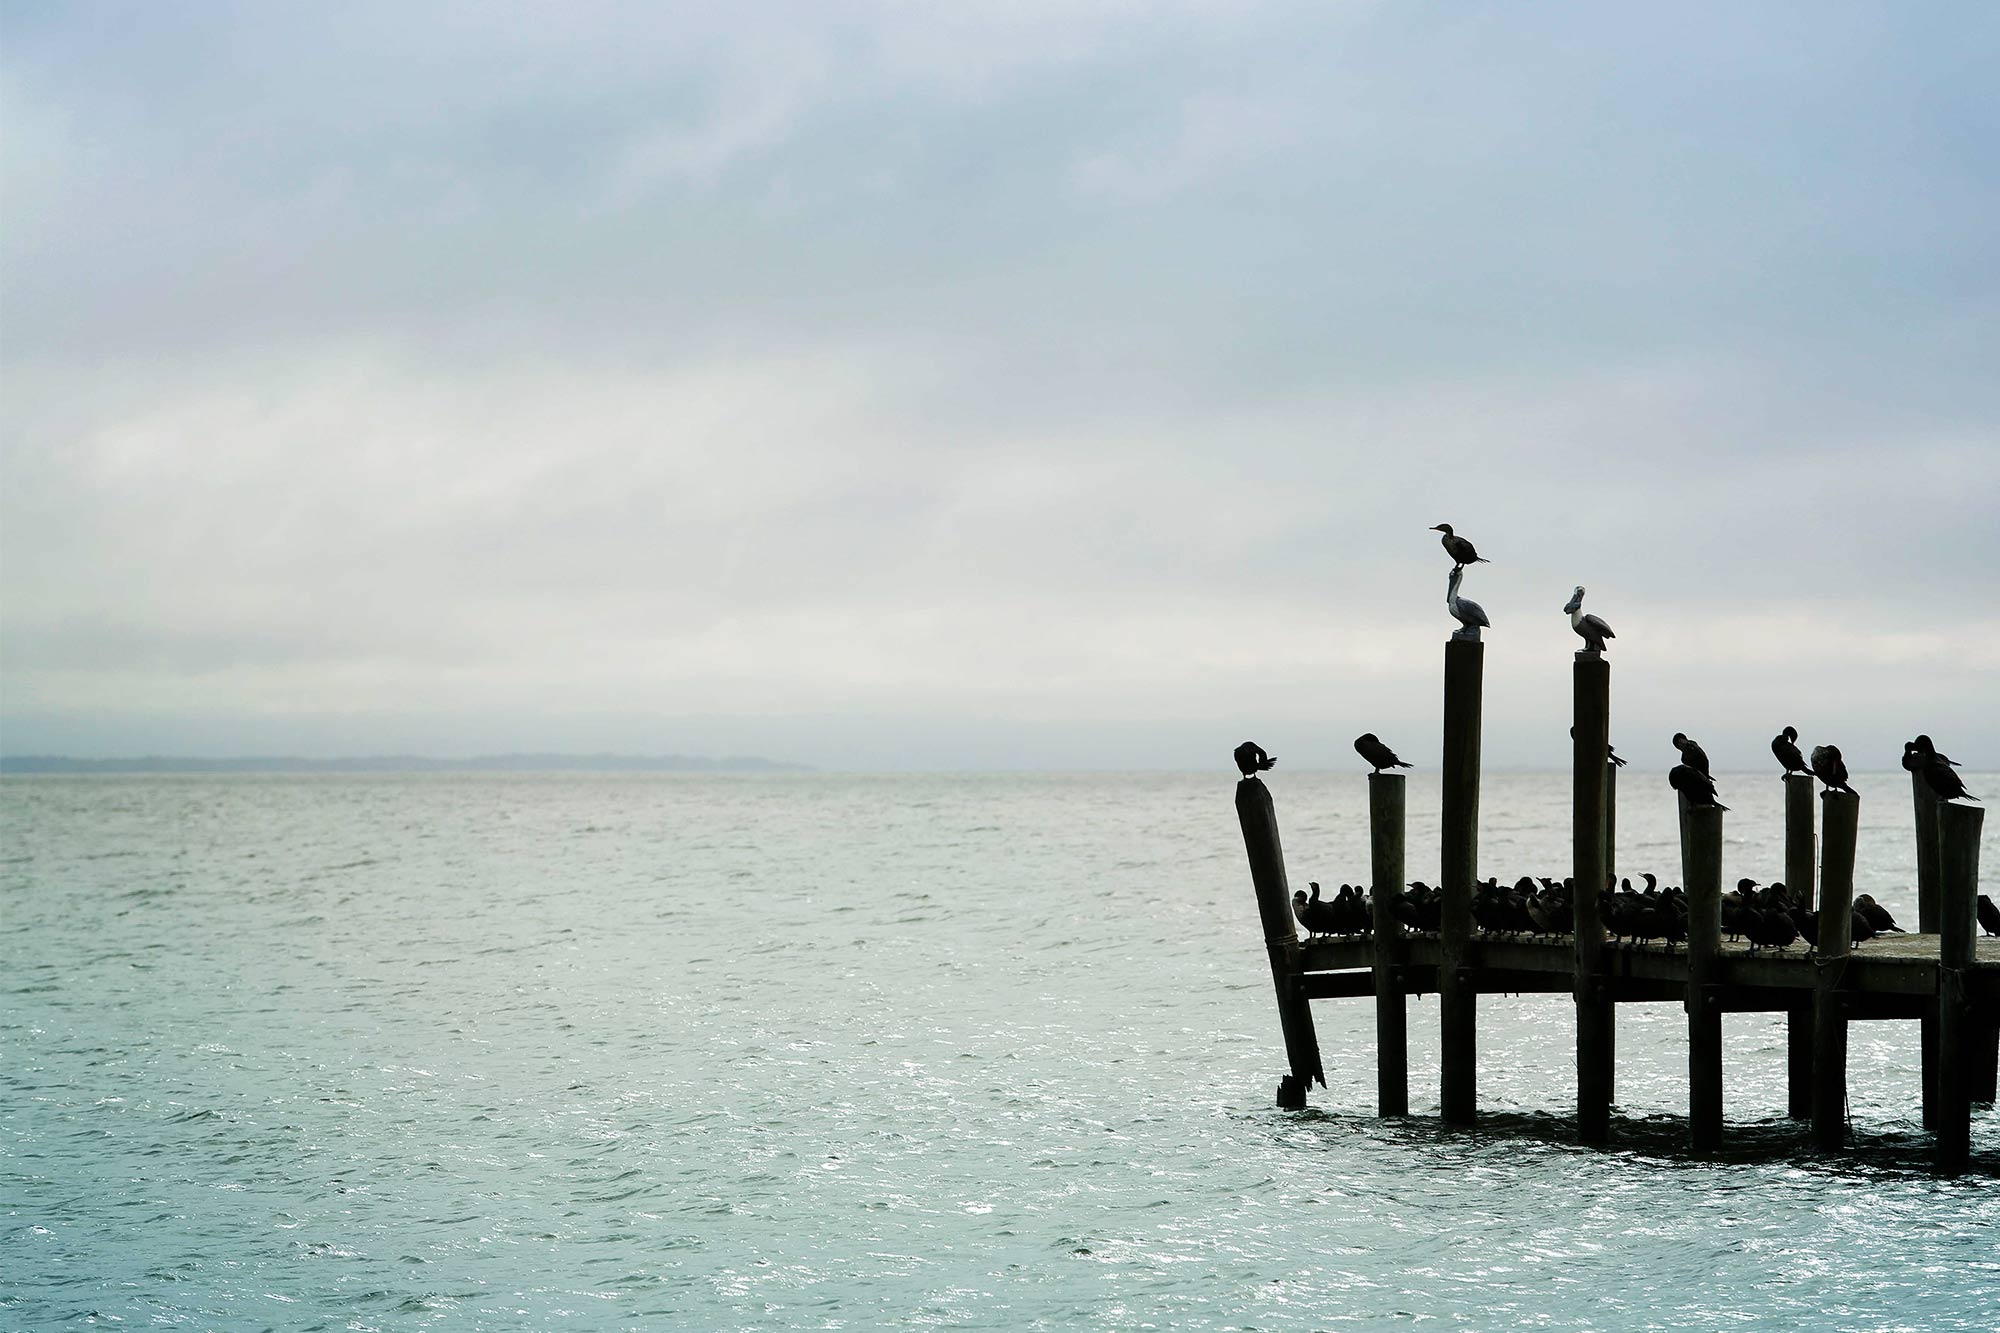 Seabirds perched on an old wooden pier